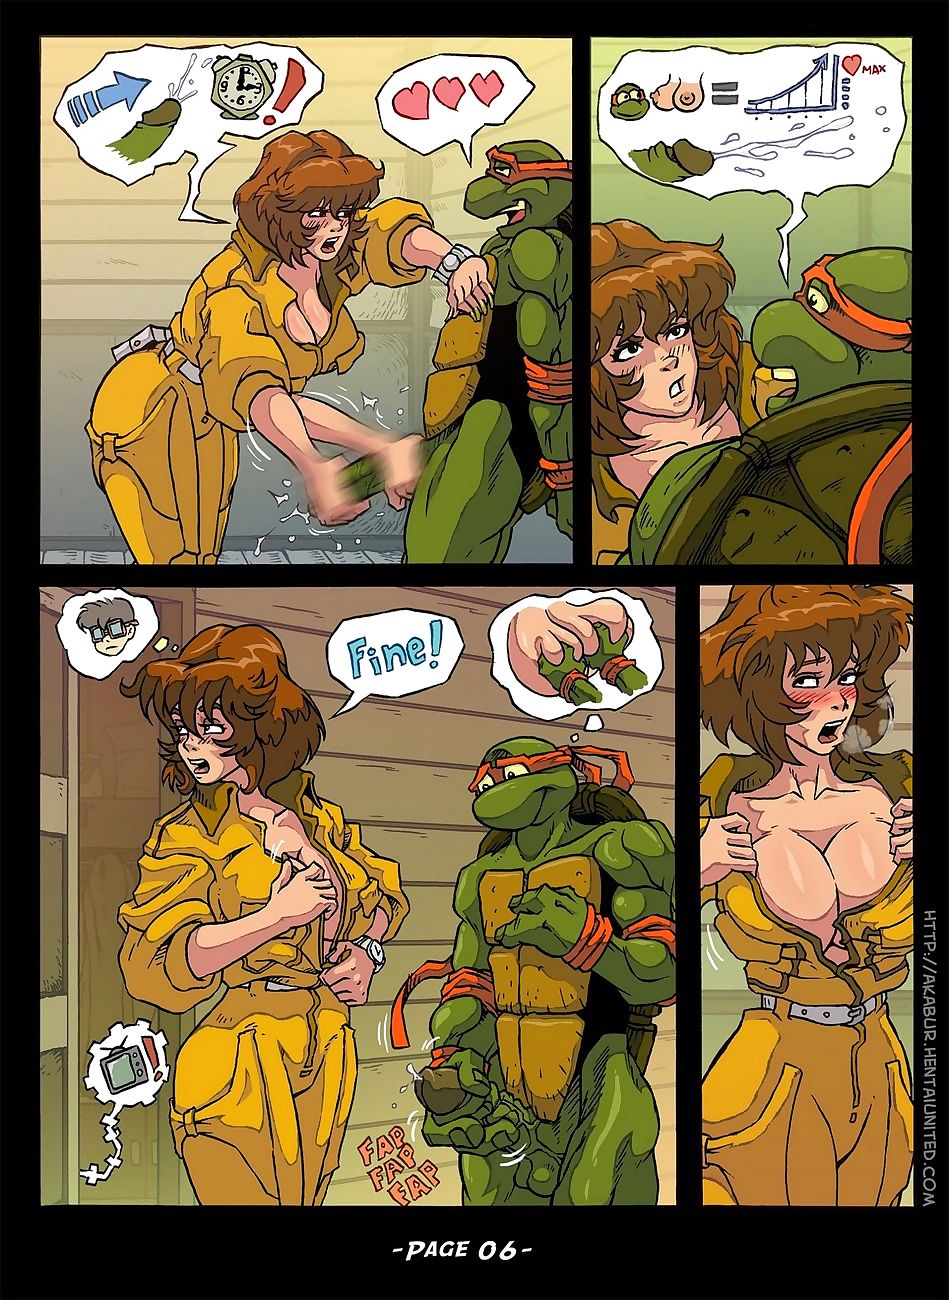 TMNT- The Slut From Channel Six page 1